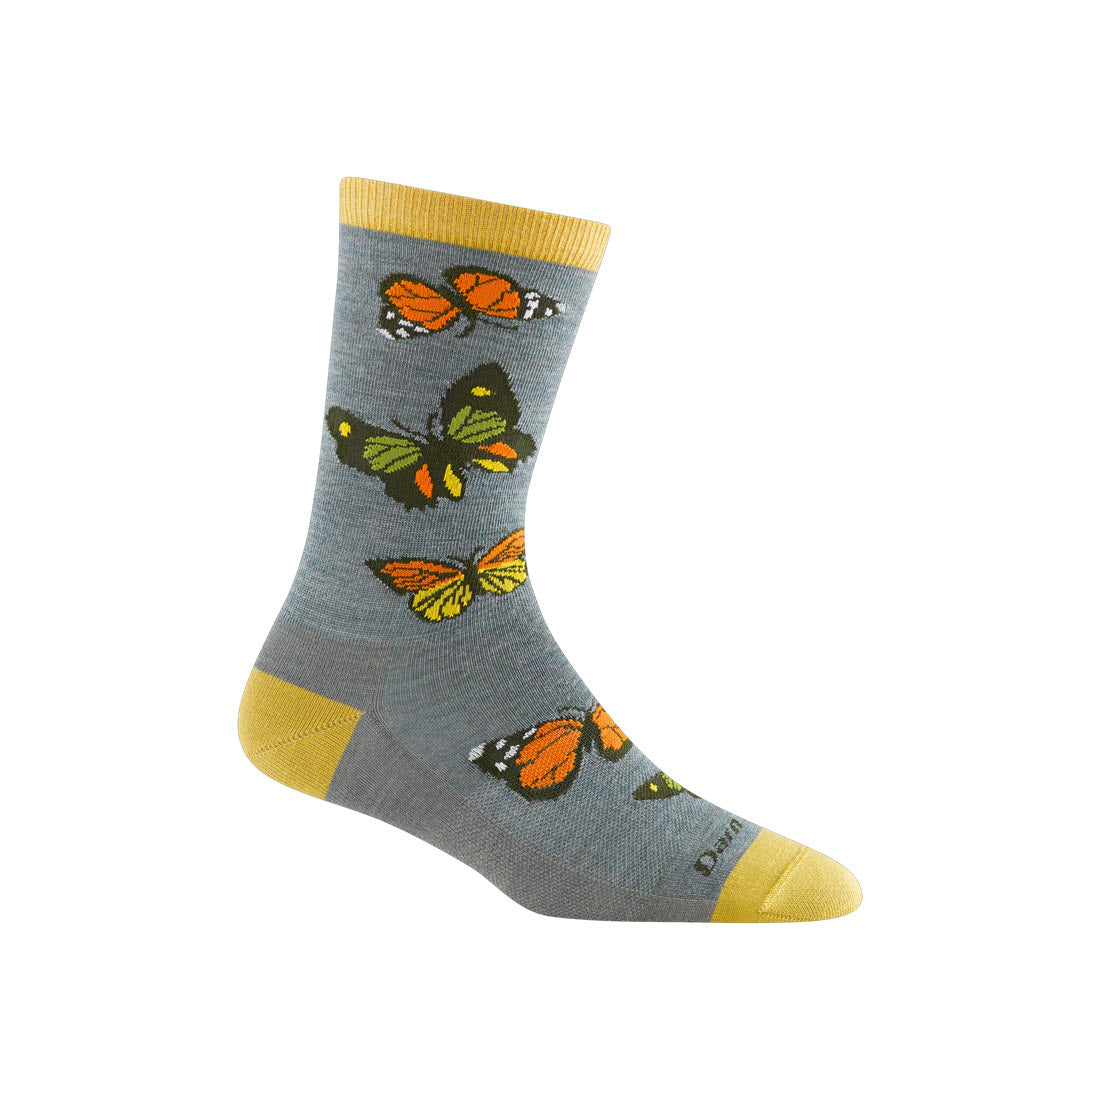 A single Seafoam Darn Tough women&#39;s flutter sock with a yellow toe and heel, decorated with a pattern of monarch butterflies.